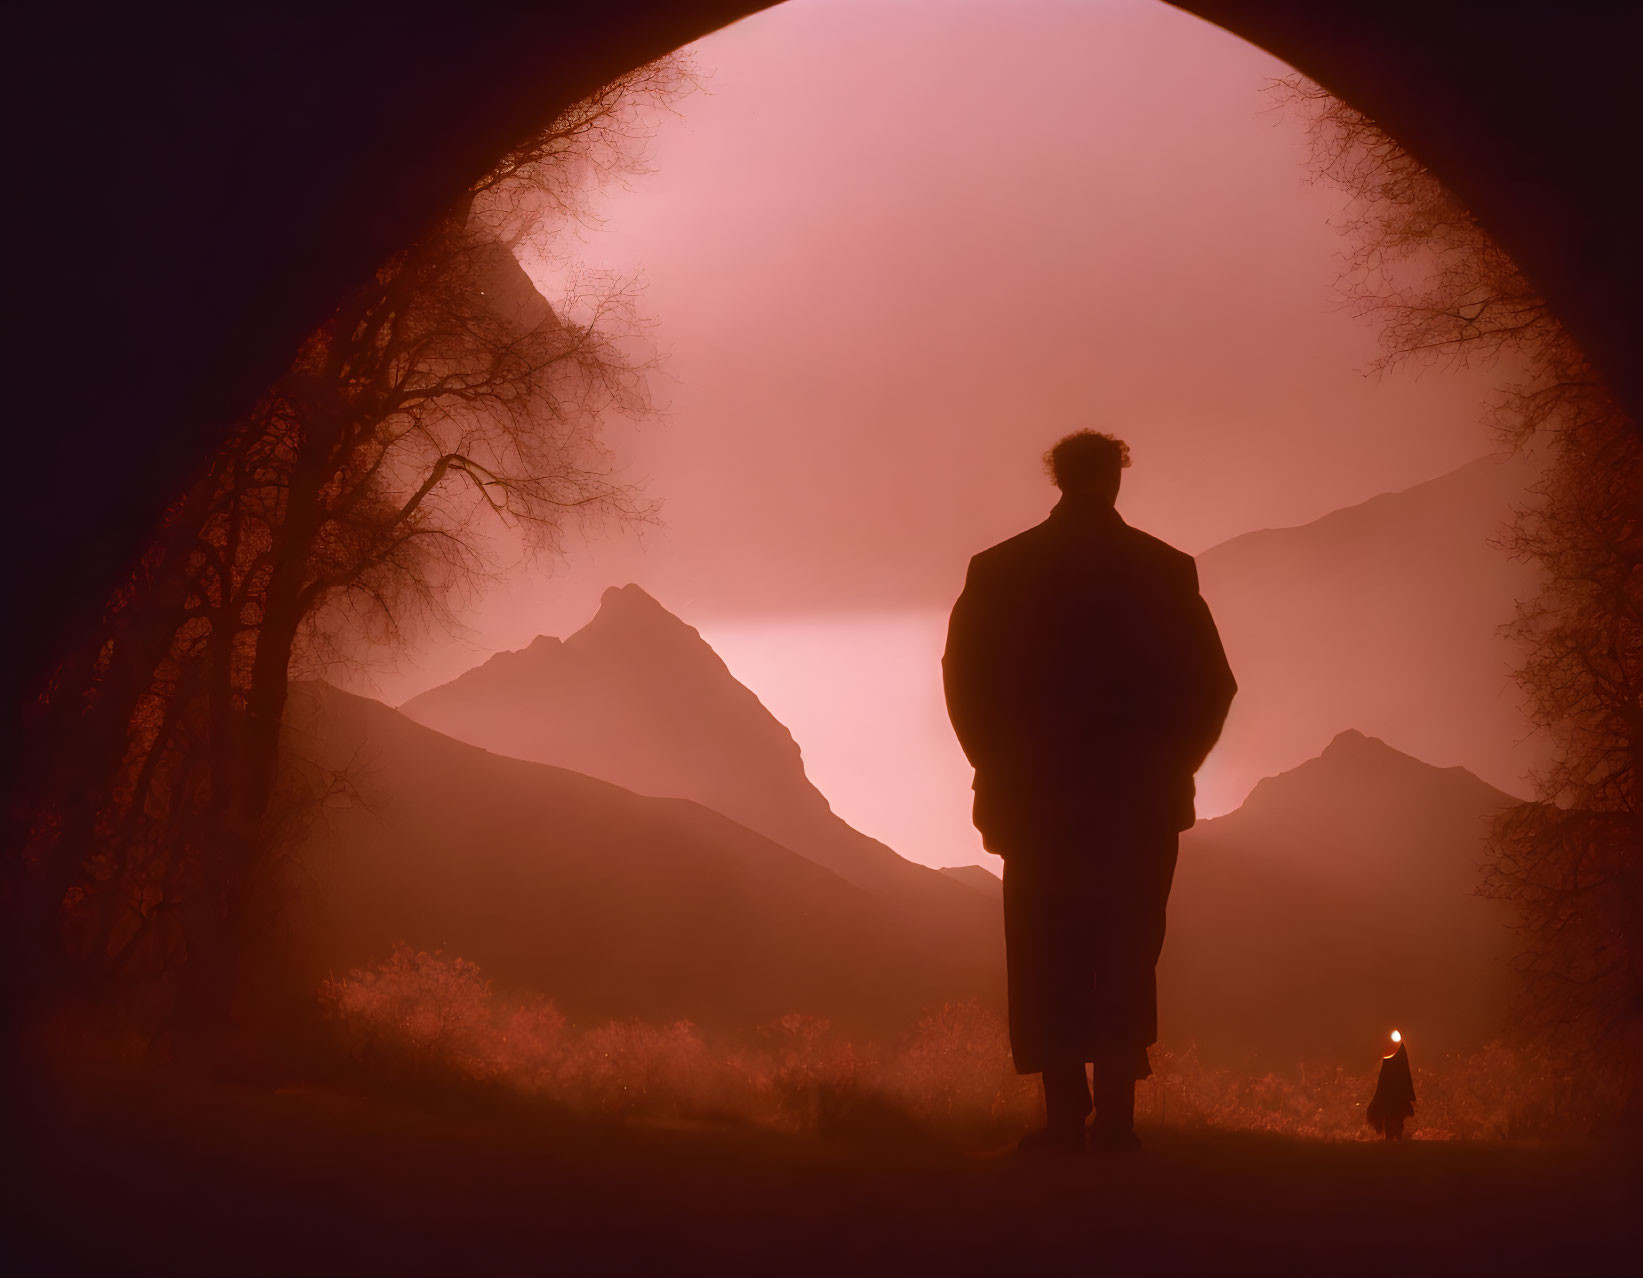 Silhouetted Figure in Cave Entrance Overlooking Mountains at Dusk